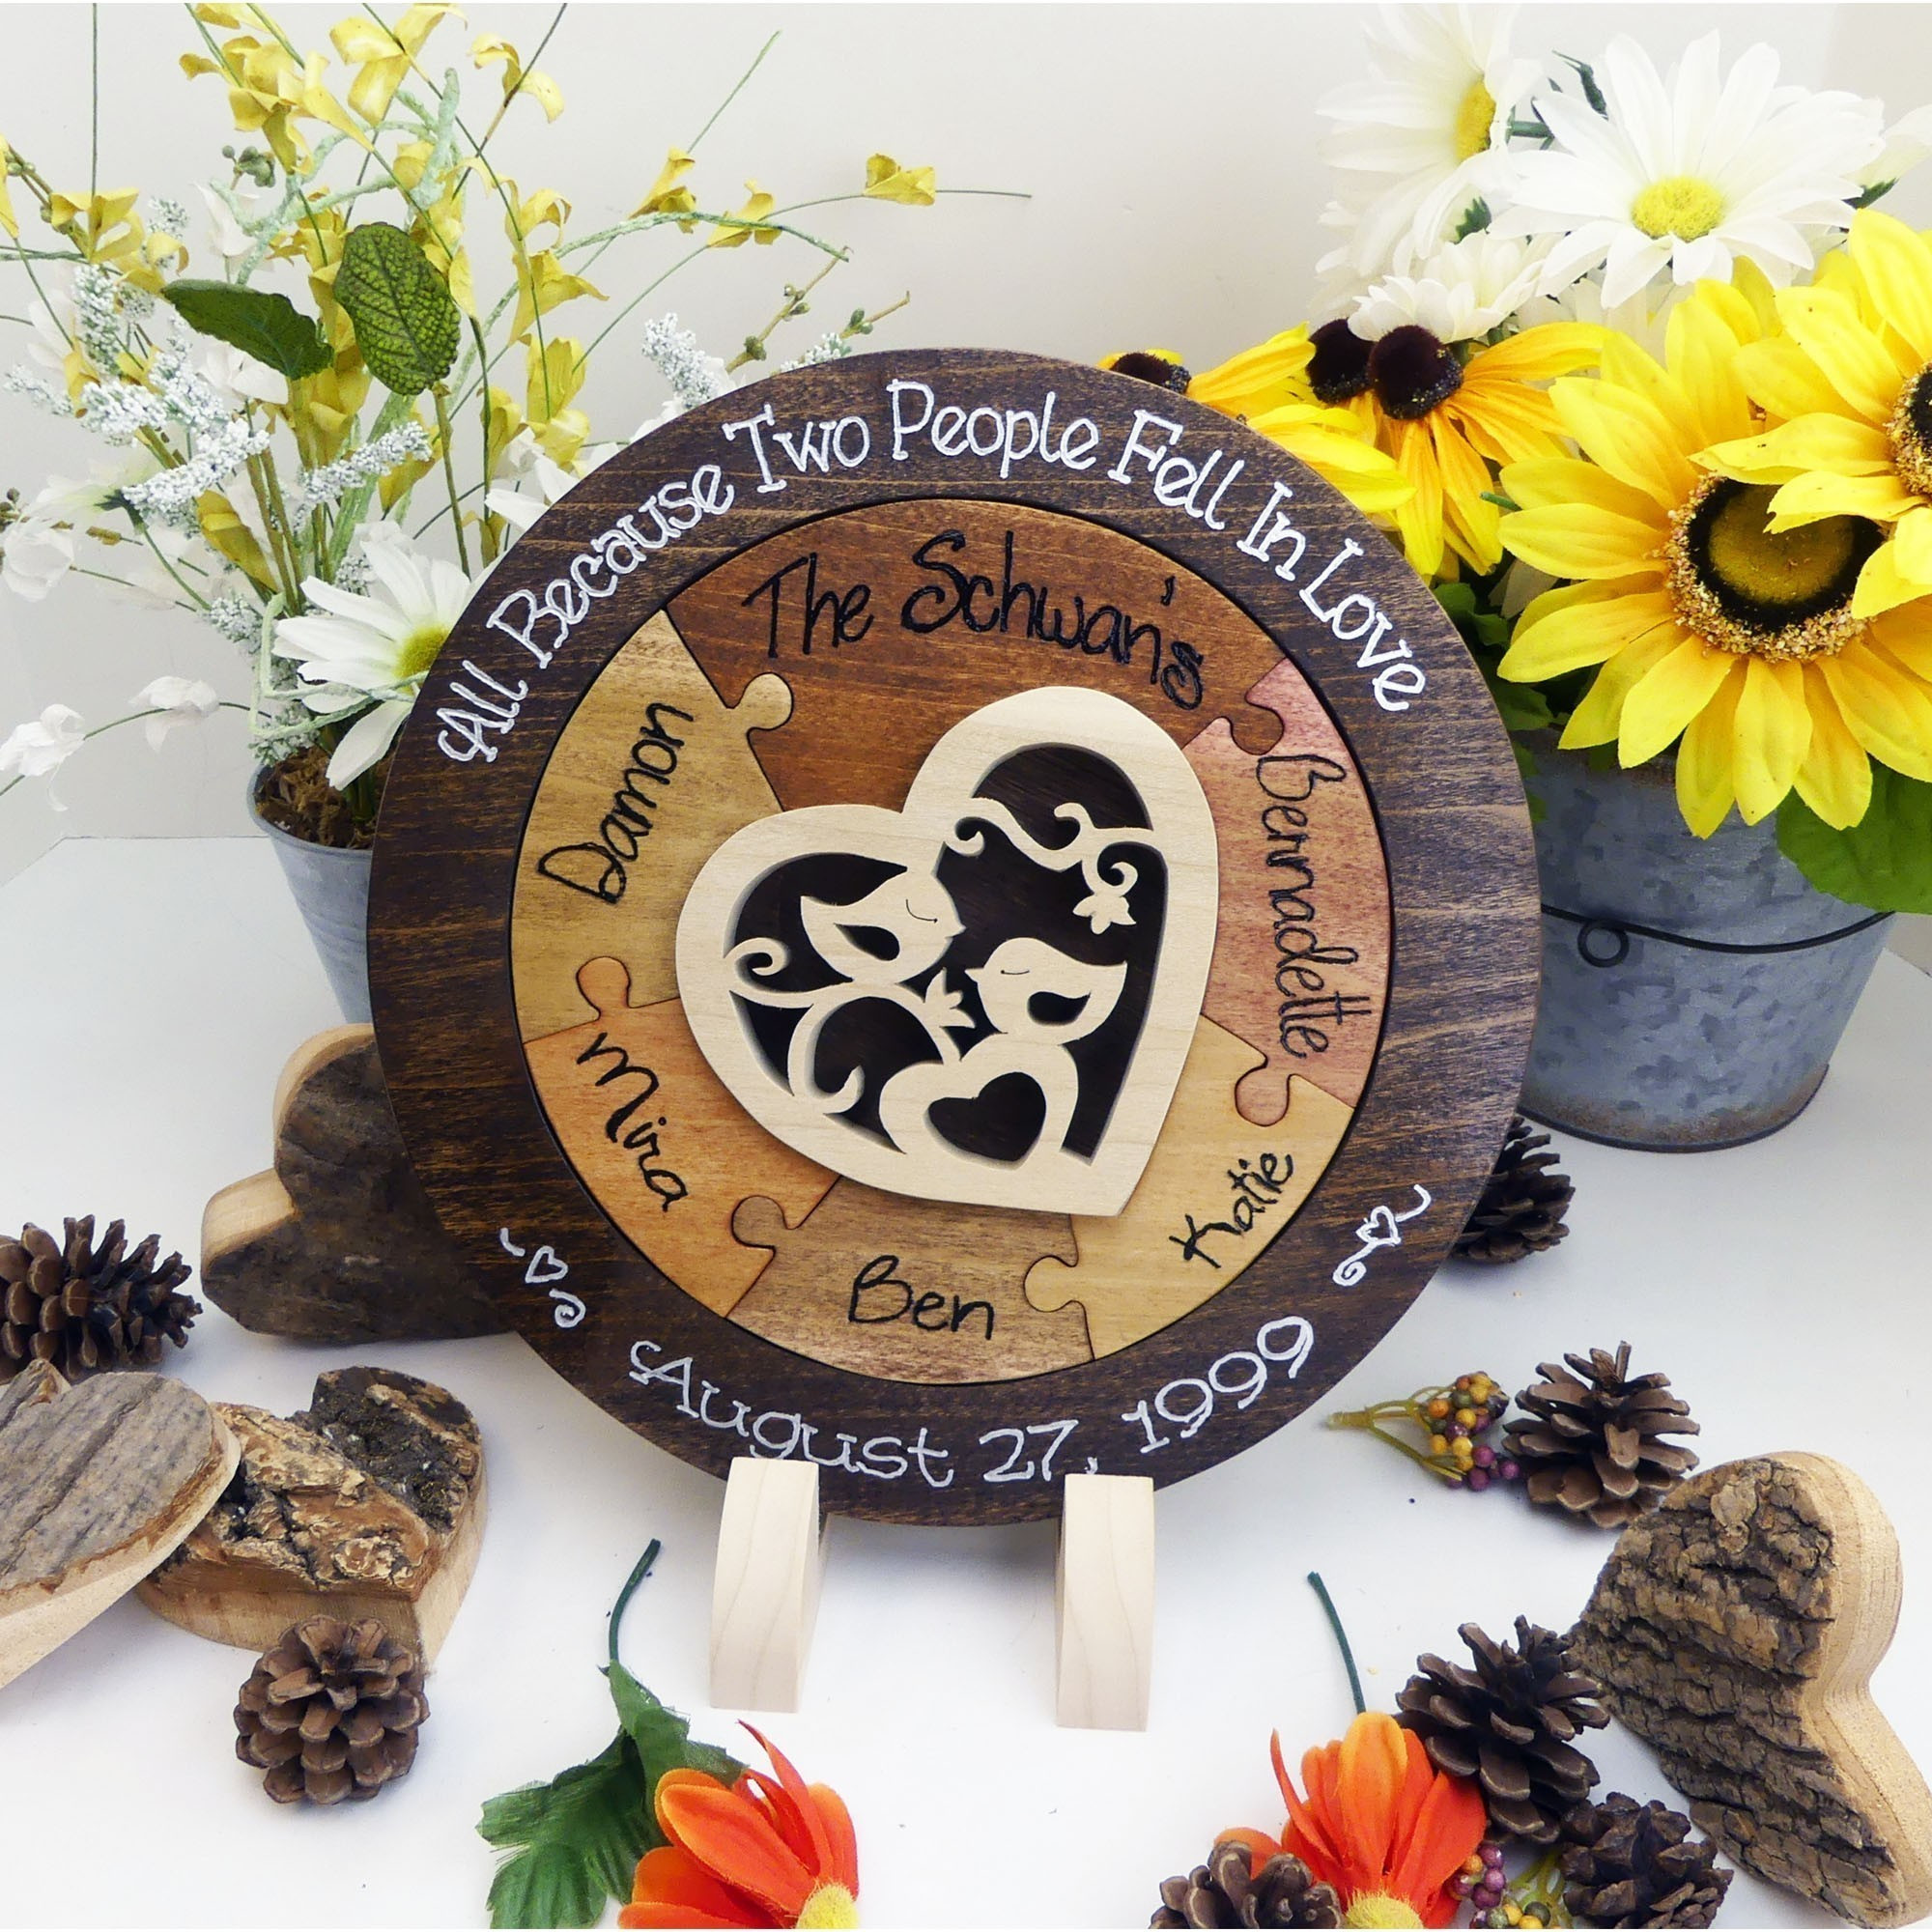 Unique Wedding Gift Ideas For Couple
 Personalized Symbolic Unity Puzzle in a Tray